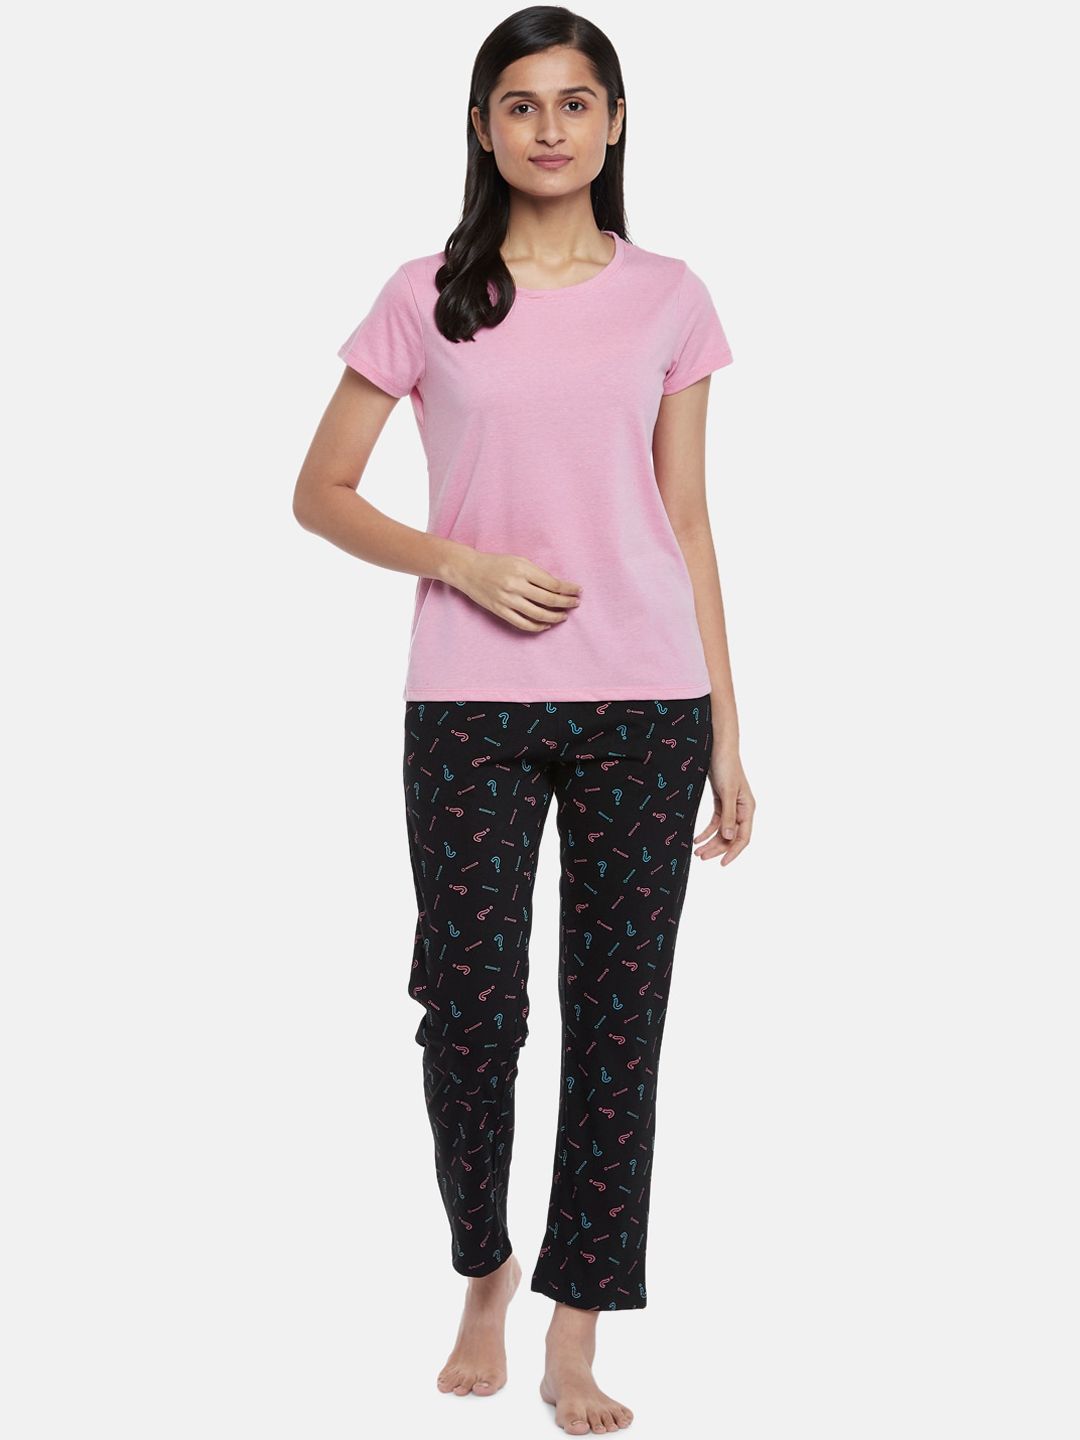 Dreamz by Pantaloons Women Black & Pink Night suit Price in India